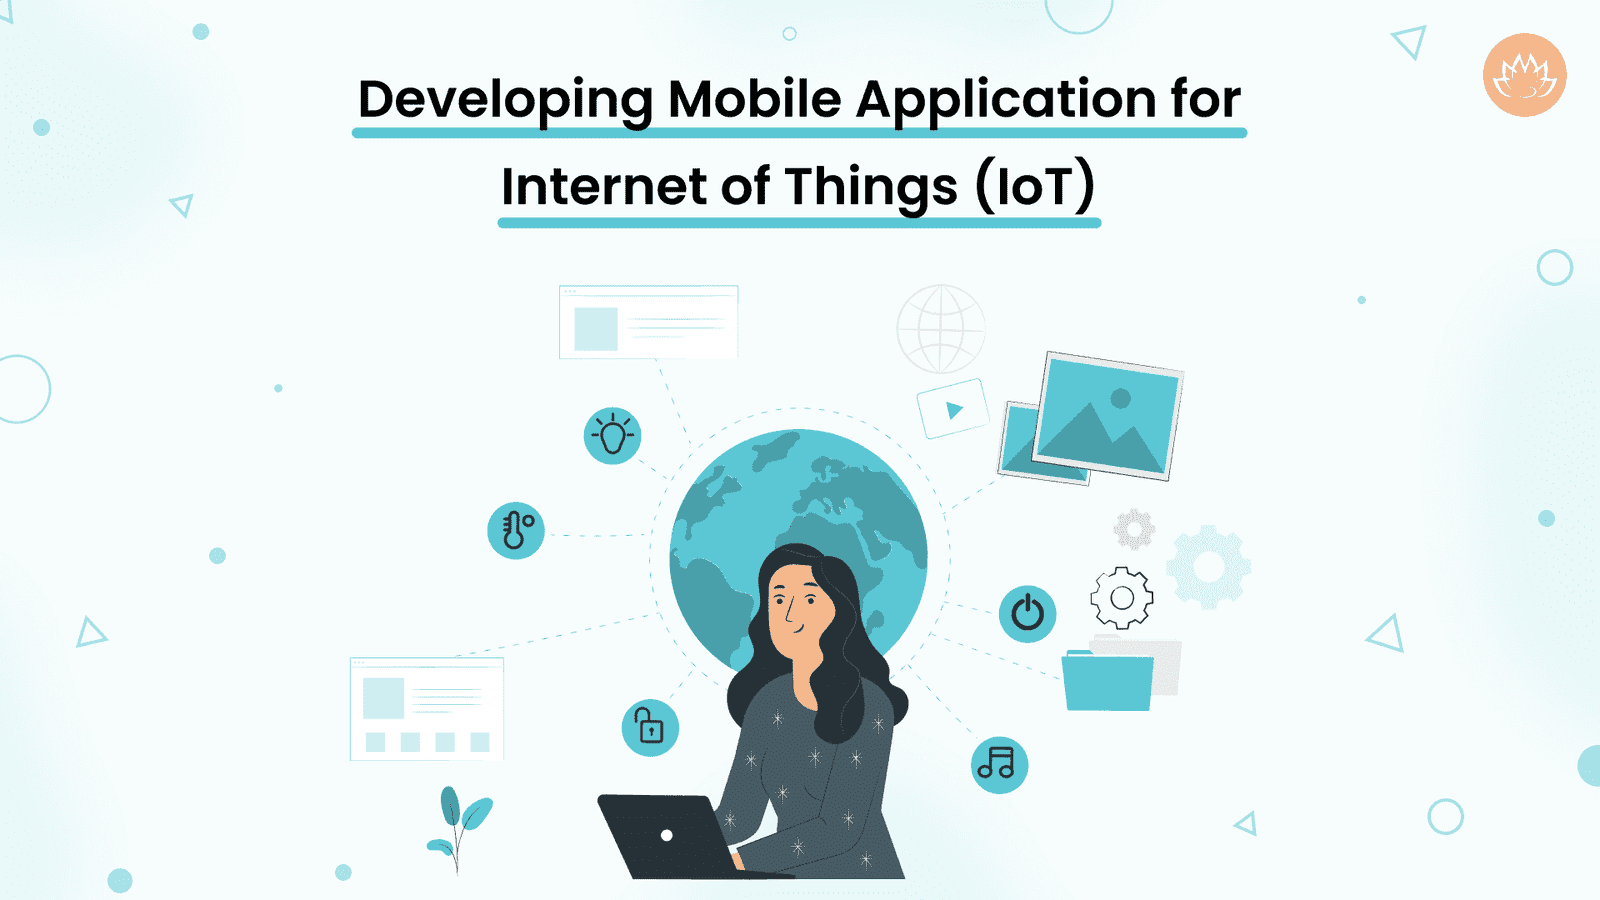 Developing Mobile Application for Internet of Things (IoT)